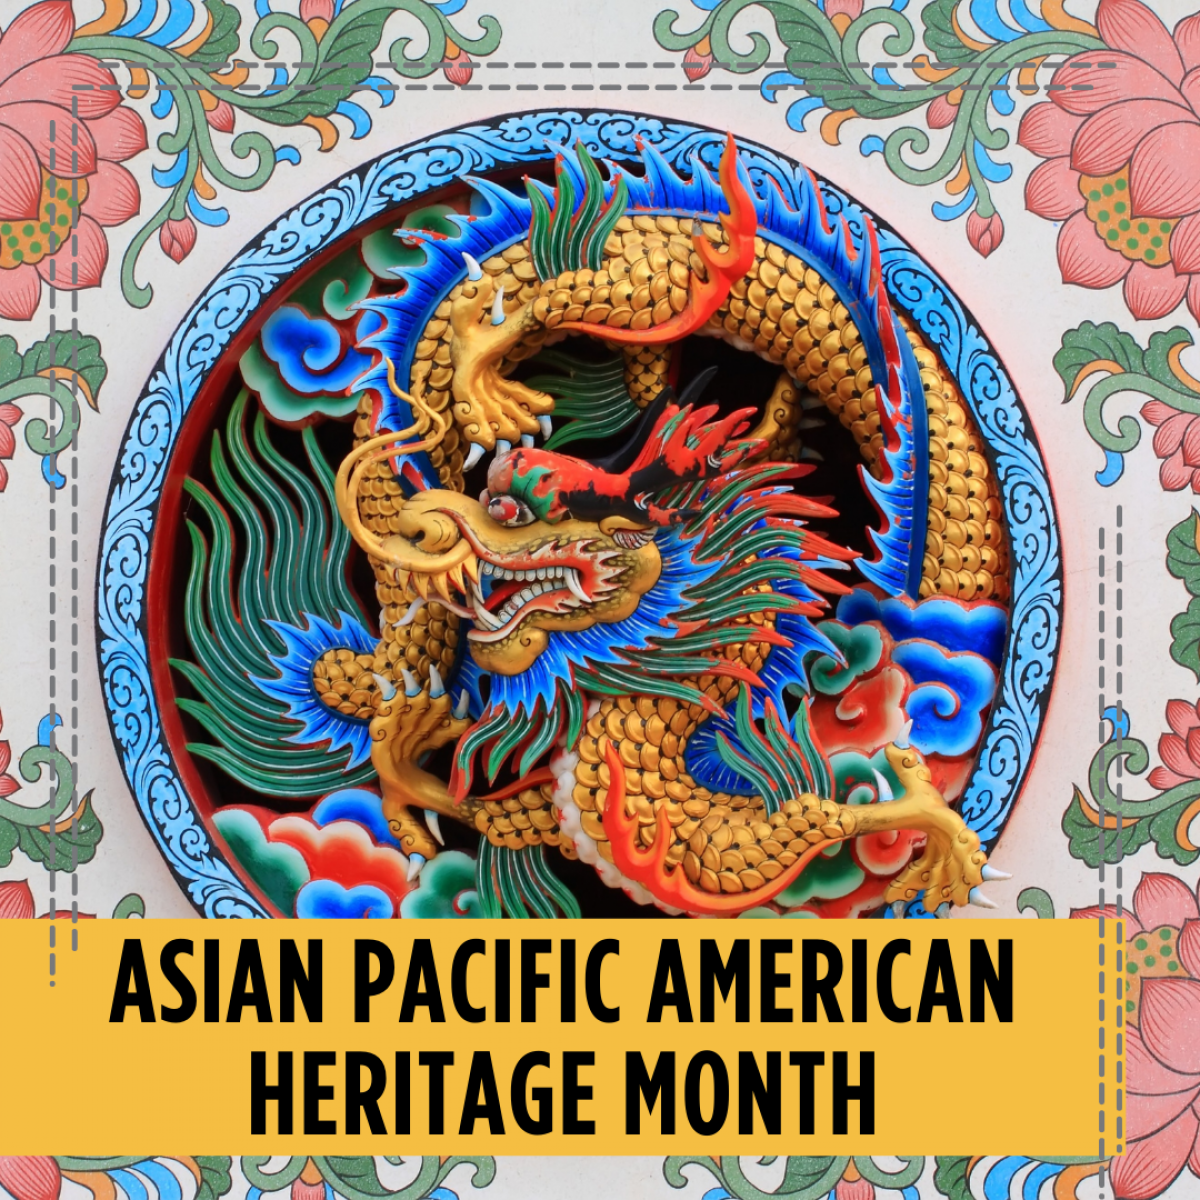 Asian Pacific American Heritage Month Image